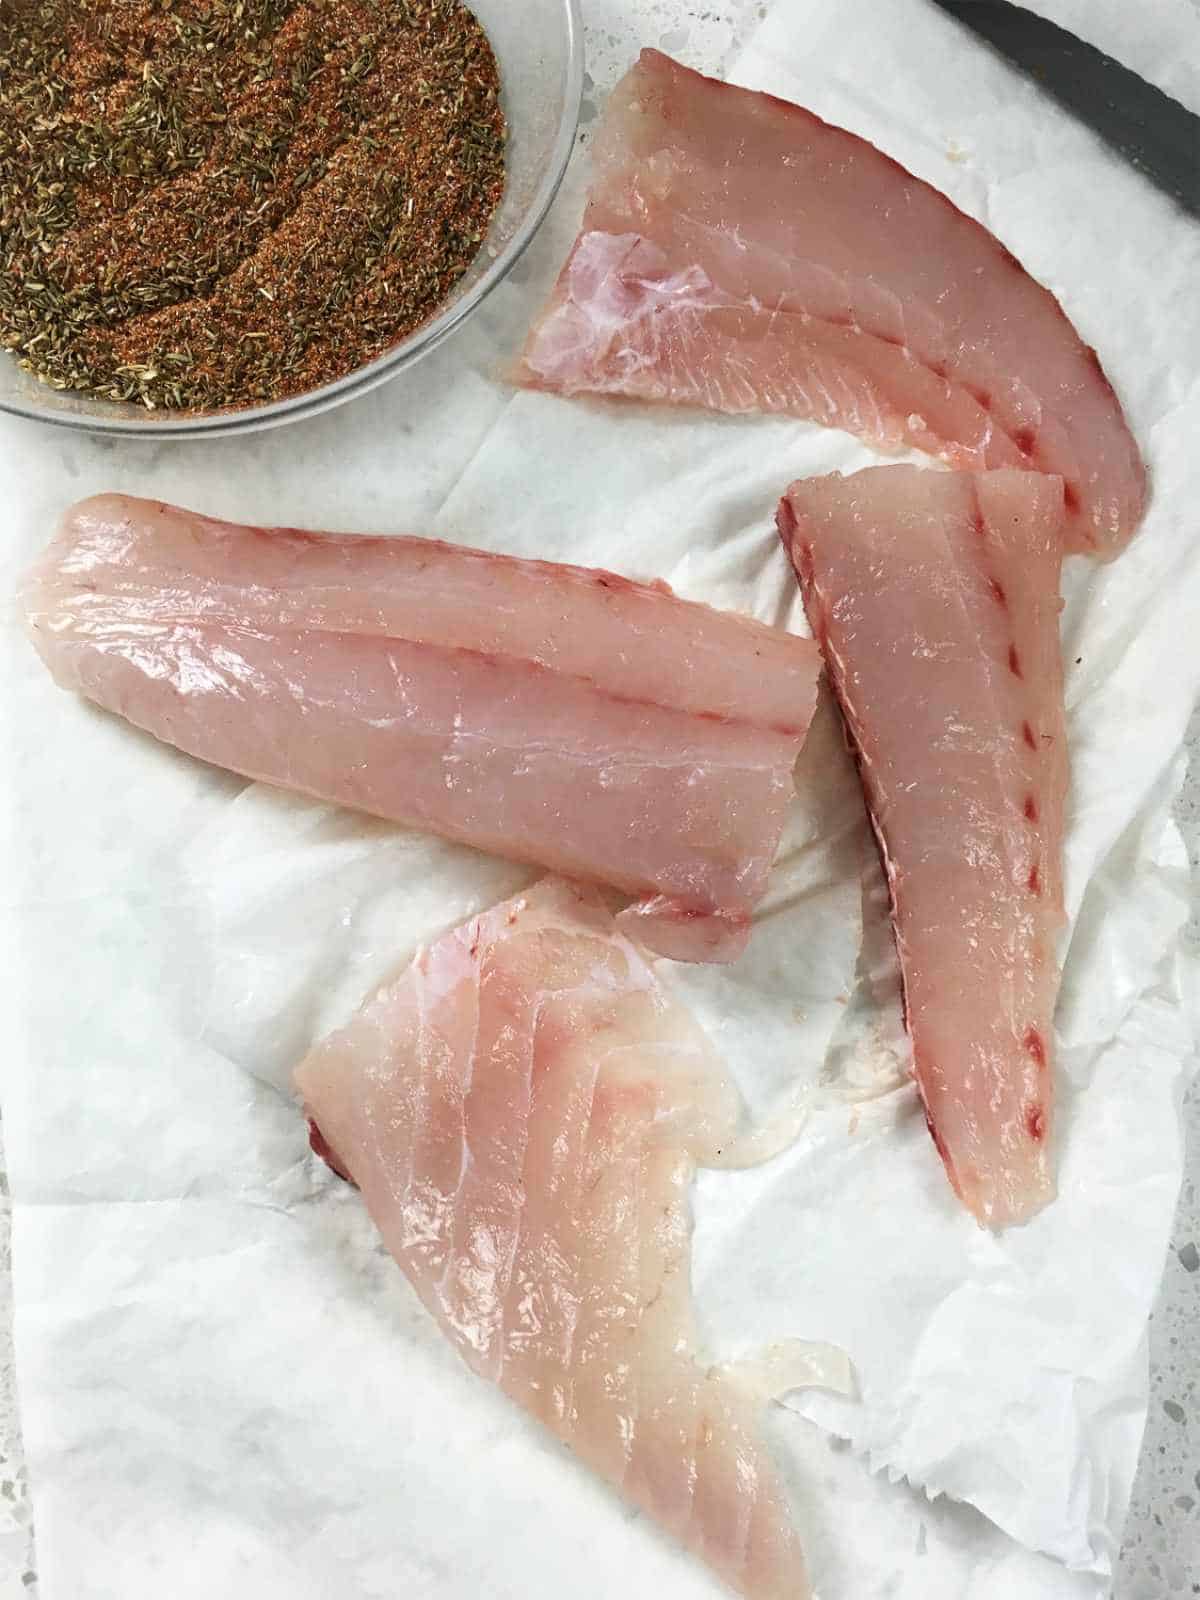 fresh grouper or snapper filets on white butcher paper with bowl of blackening seasoning nearby.